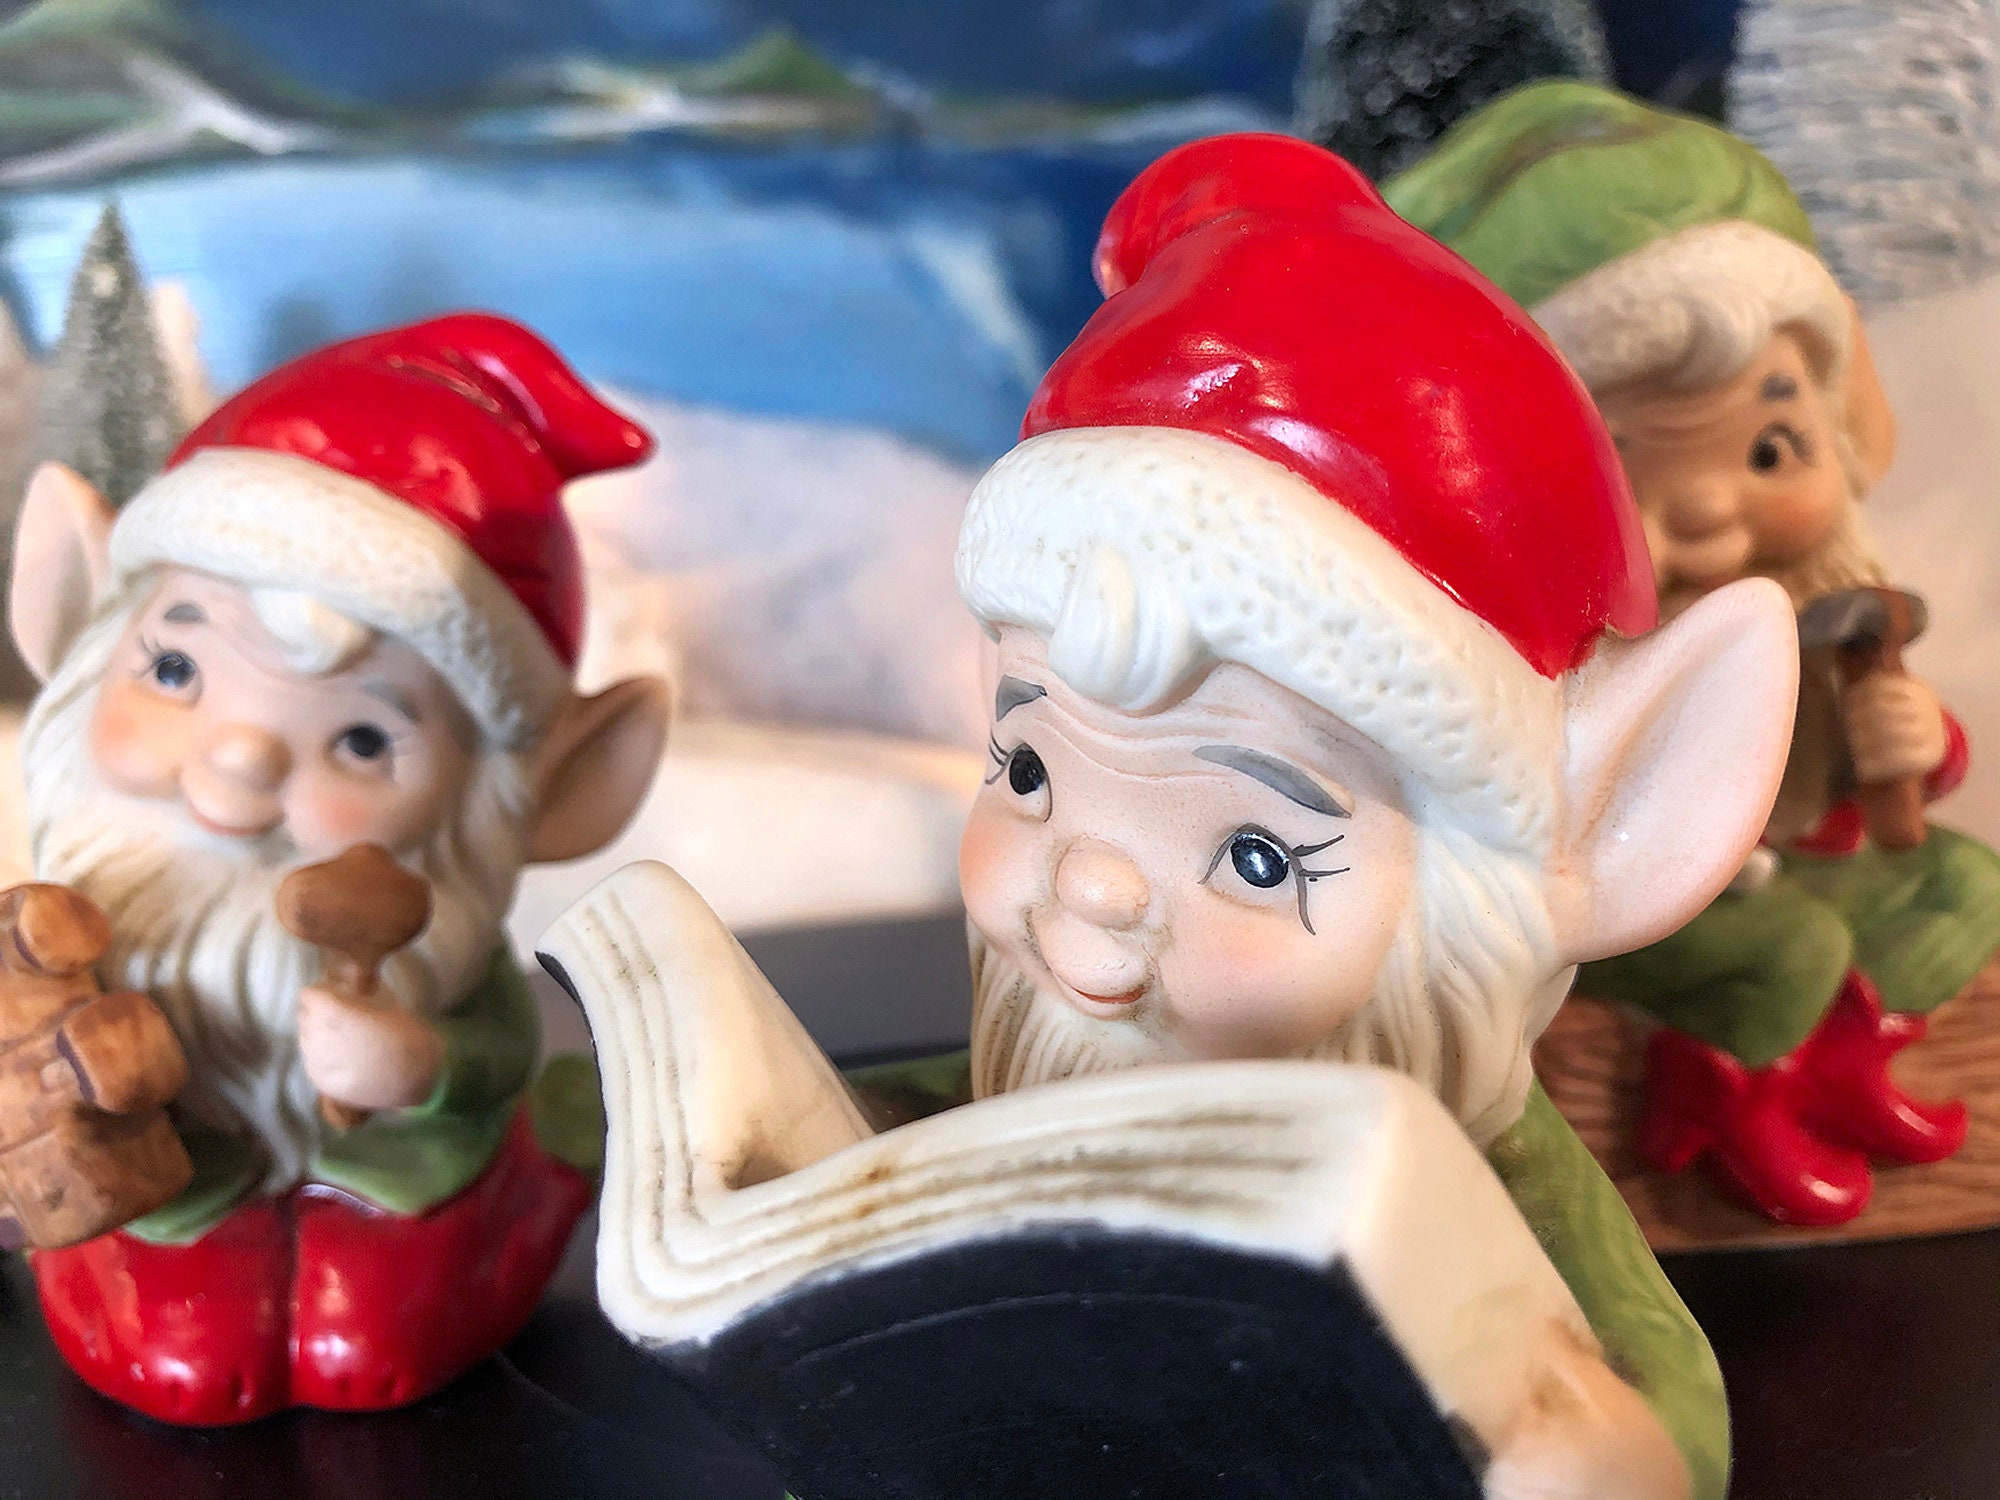 Elf Christmas Figurines. Set of Two Homko Hand Painted Porcelain